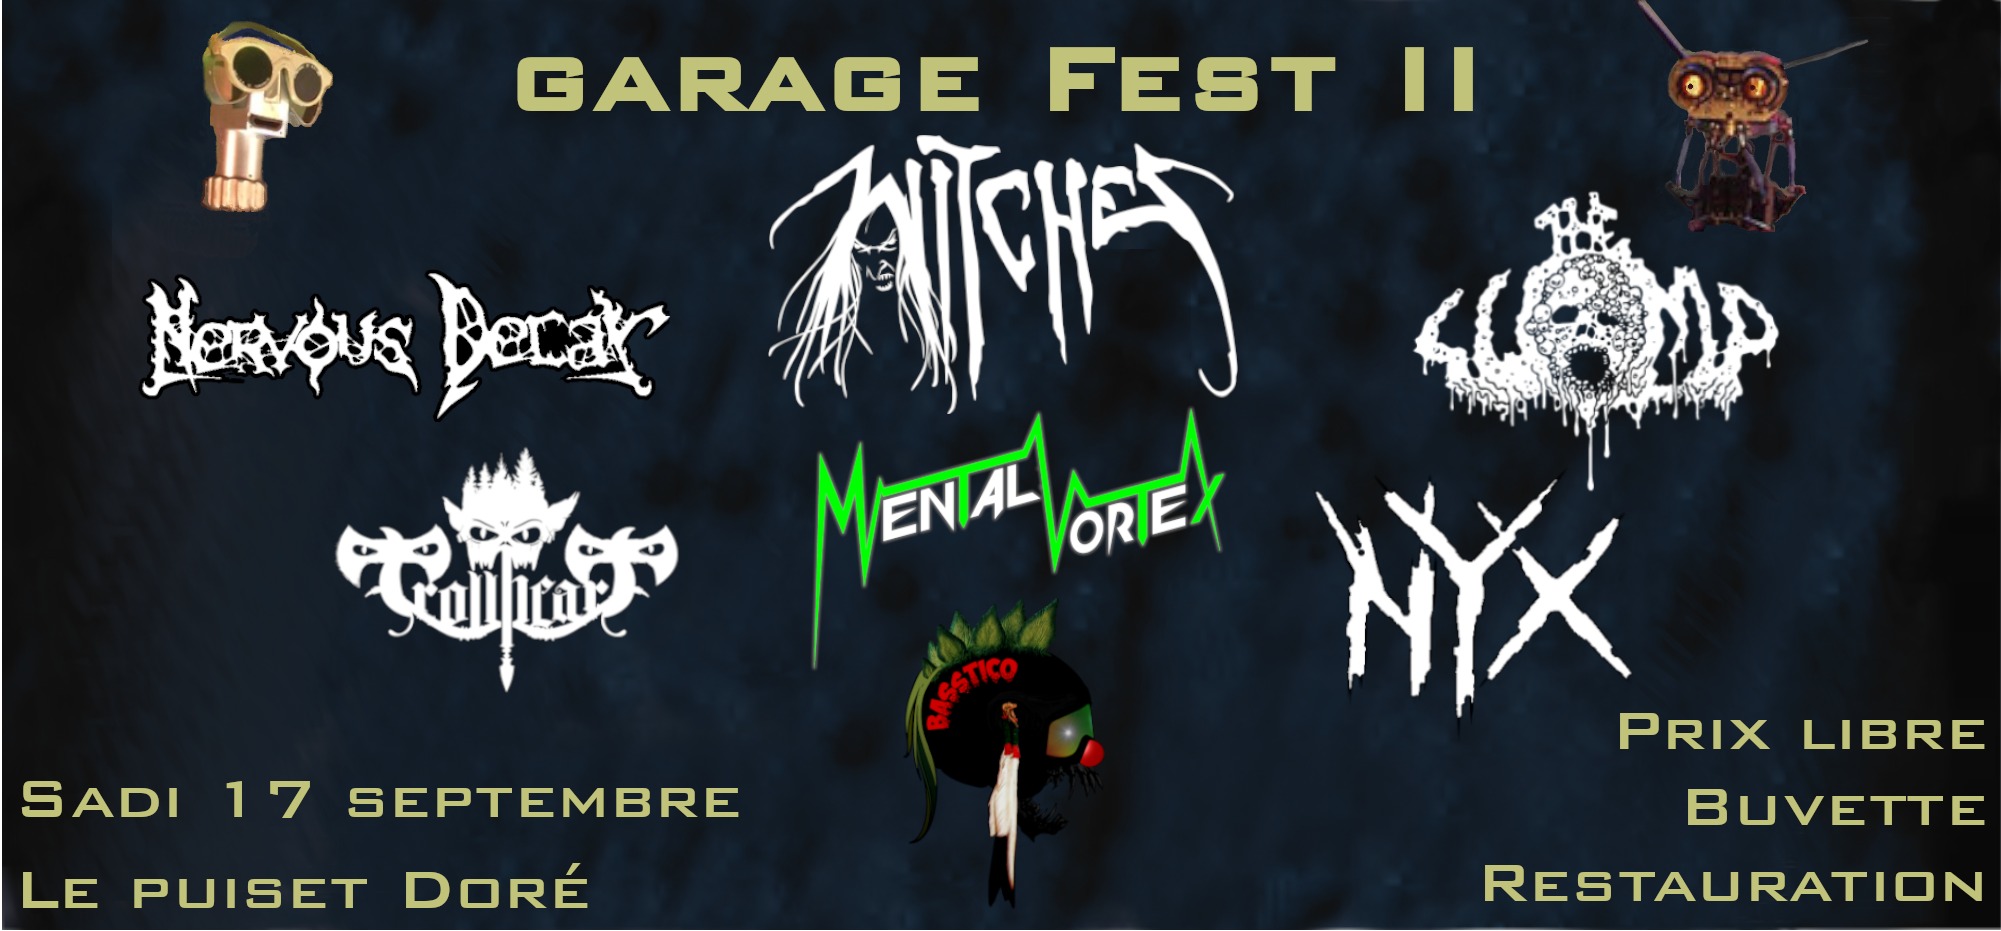 Witches flyer Witches + The Lump + Nervous Decay + NYX + Trollheart + Mental Vortex + Basstico @ GARAGE FEST II - PRIVATE PARTY - SOIREE PRIVEE  Nantes (44)